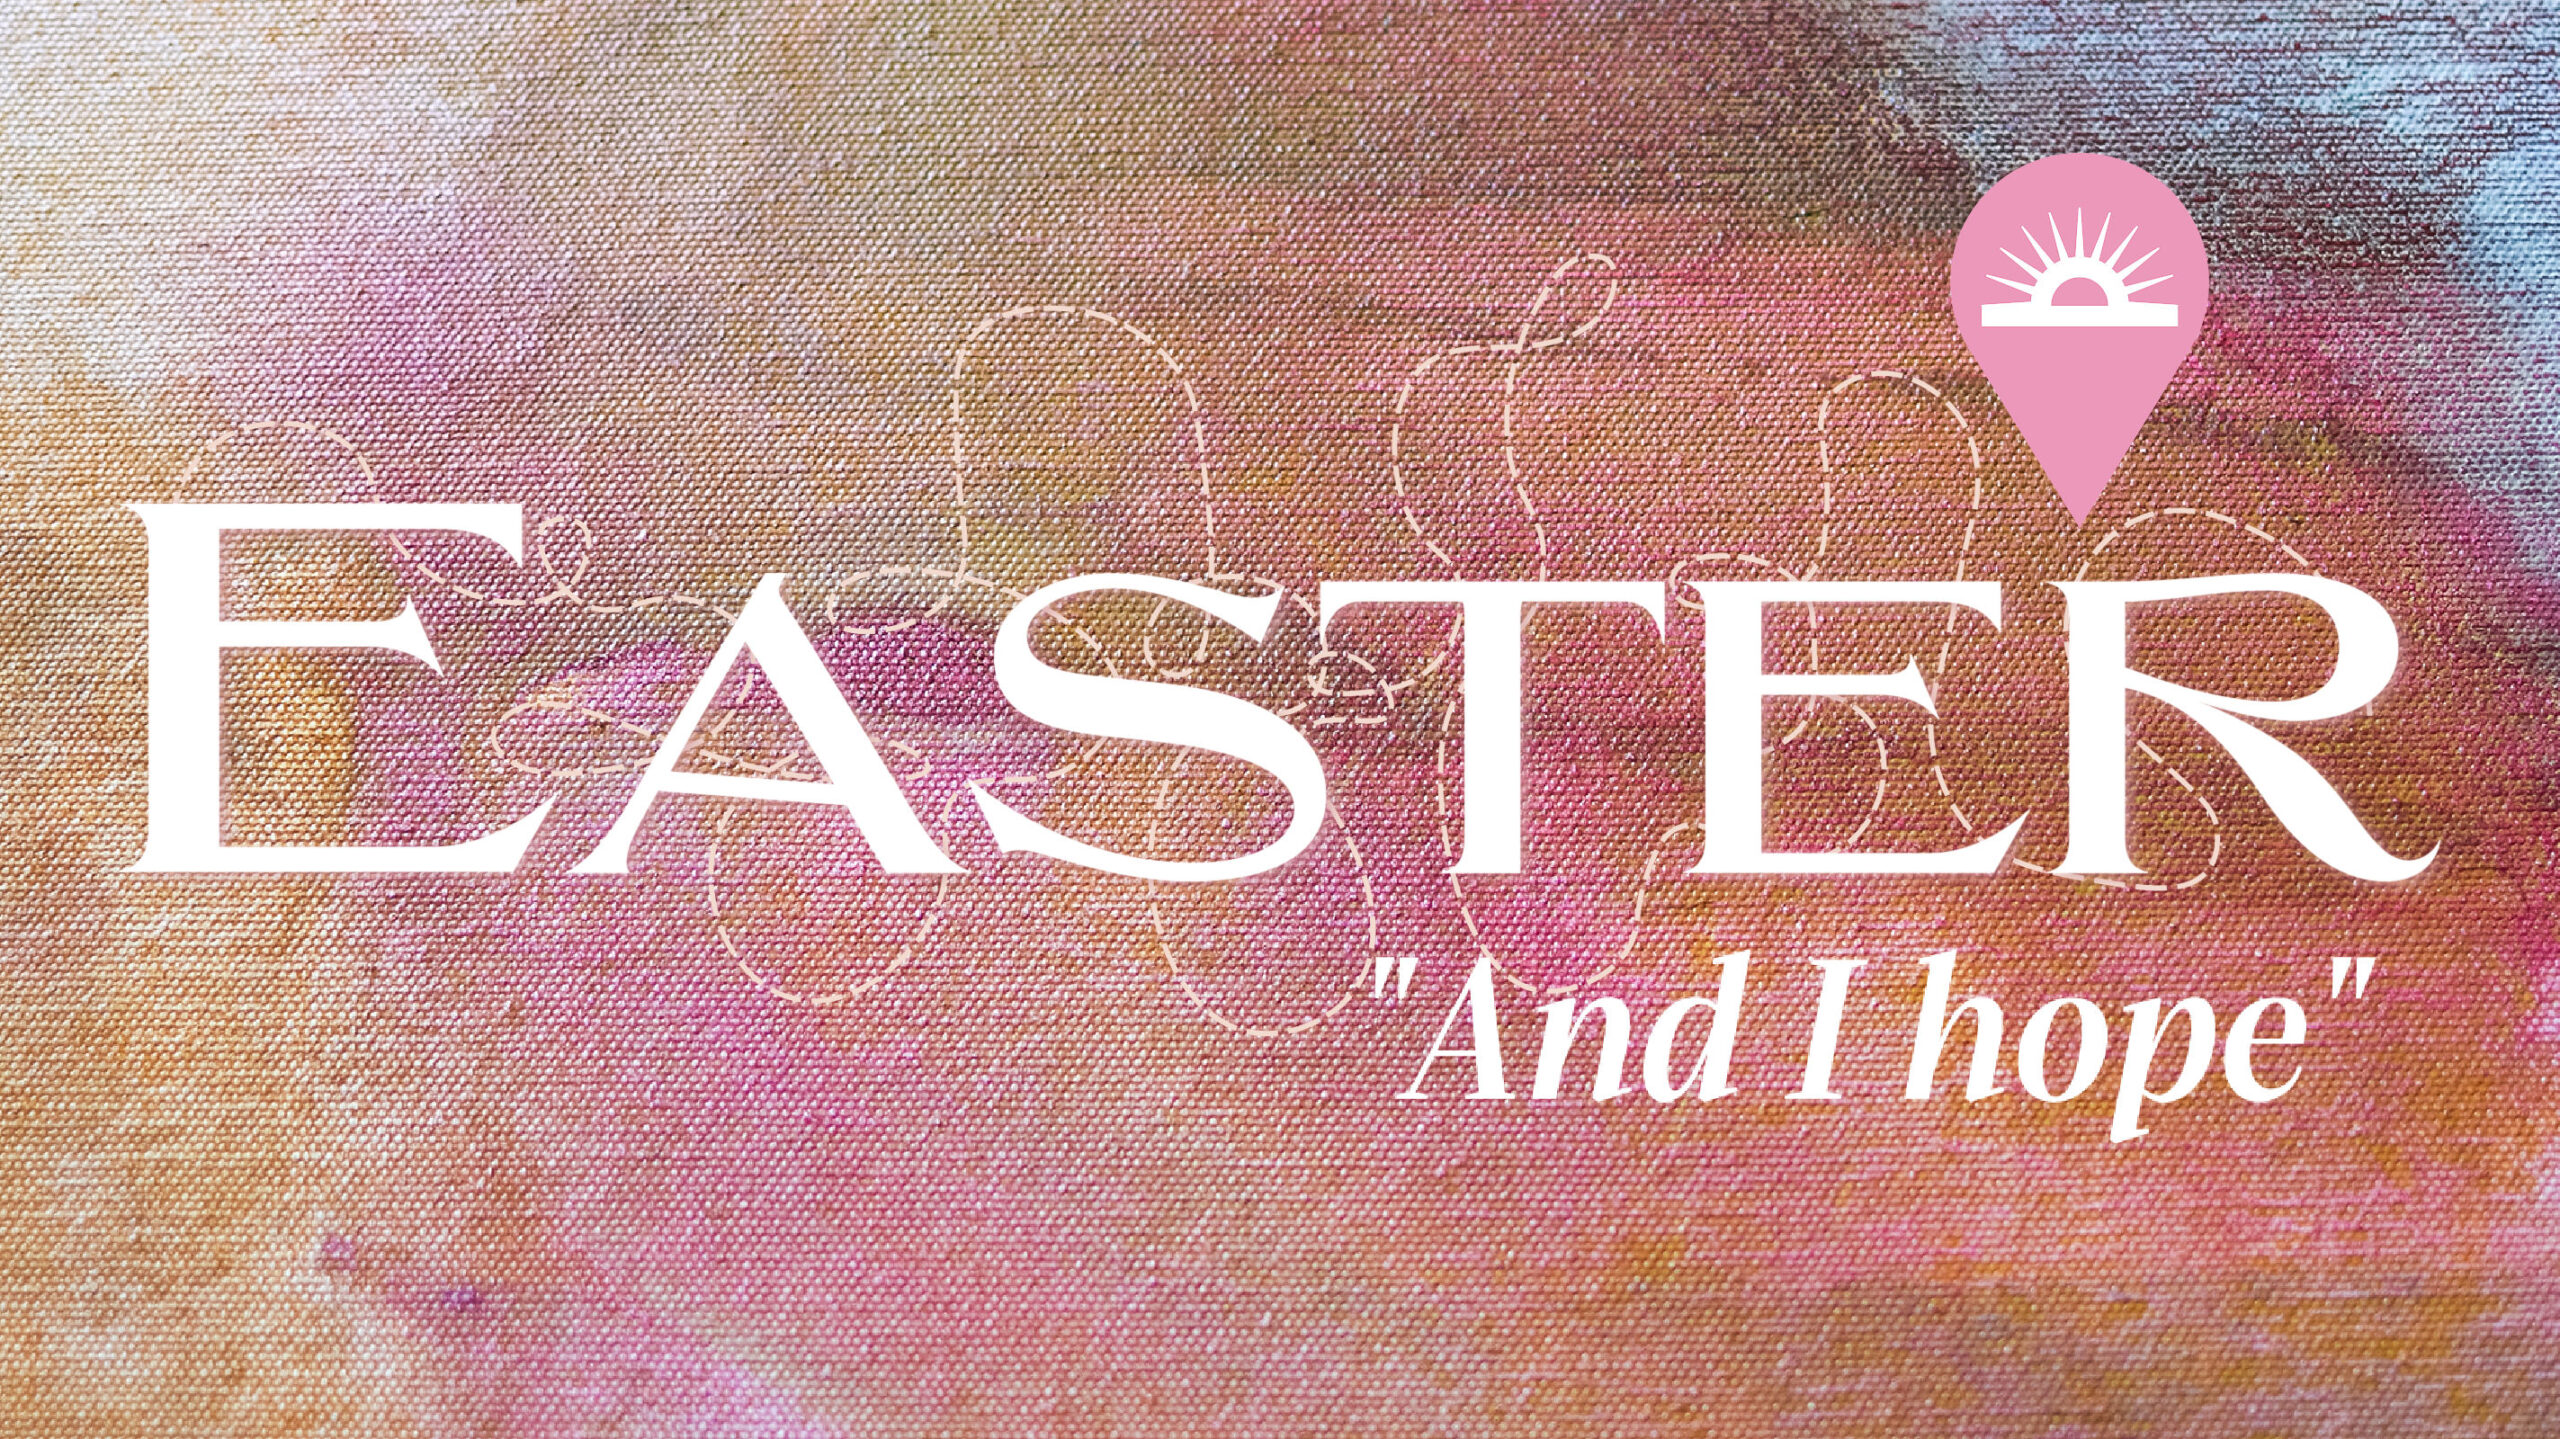 Celebrate the hope of Easter.